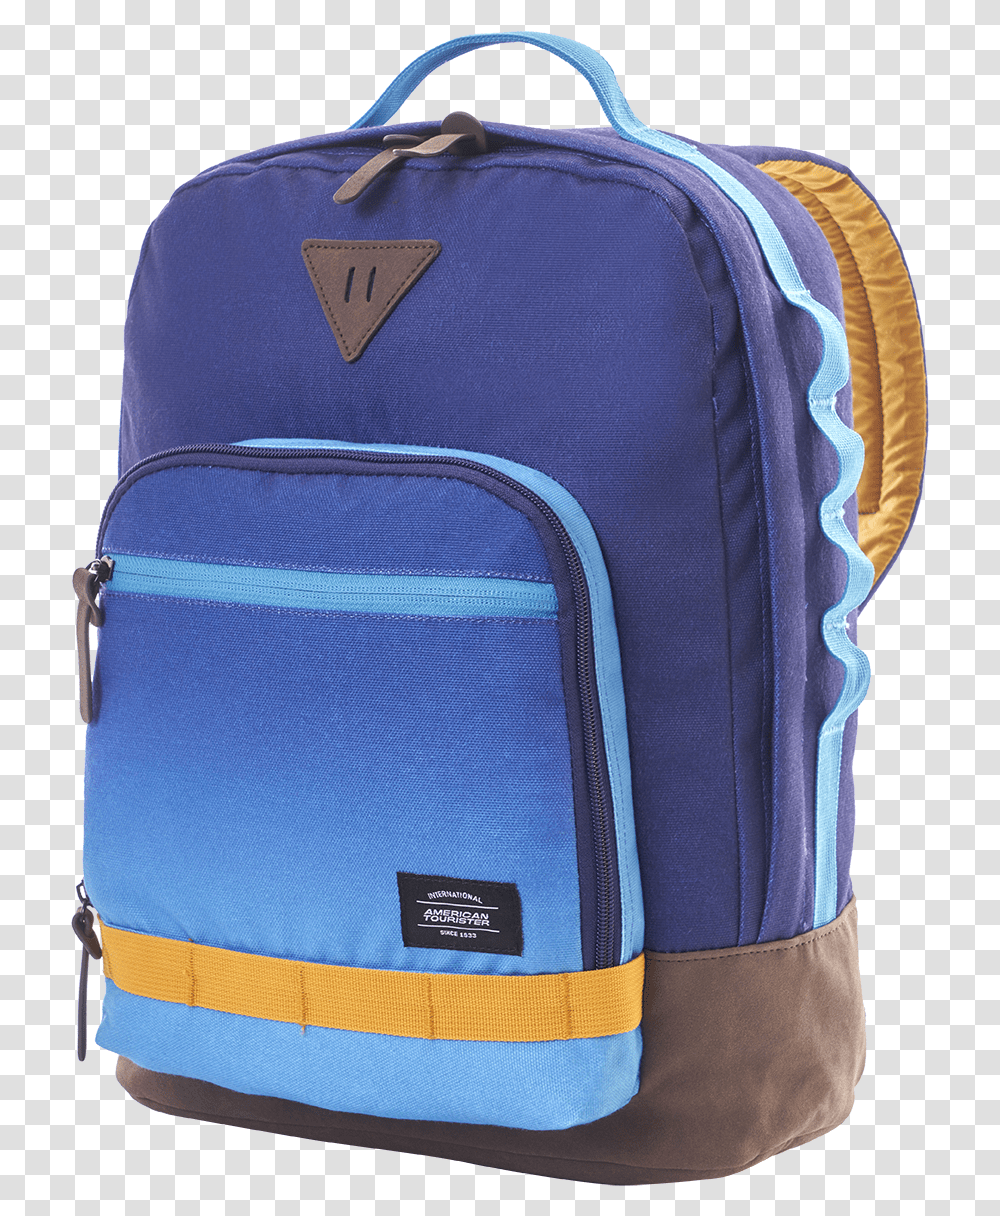 American Tourister Mod Backpack Download American Tourister School Bags Transparent Png